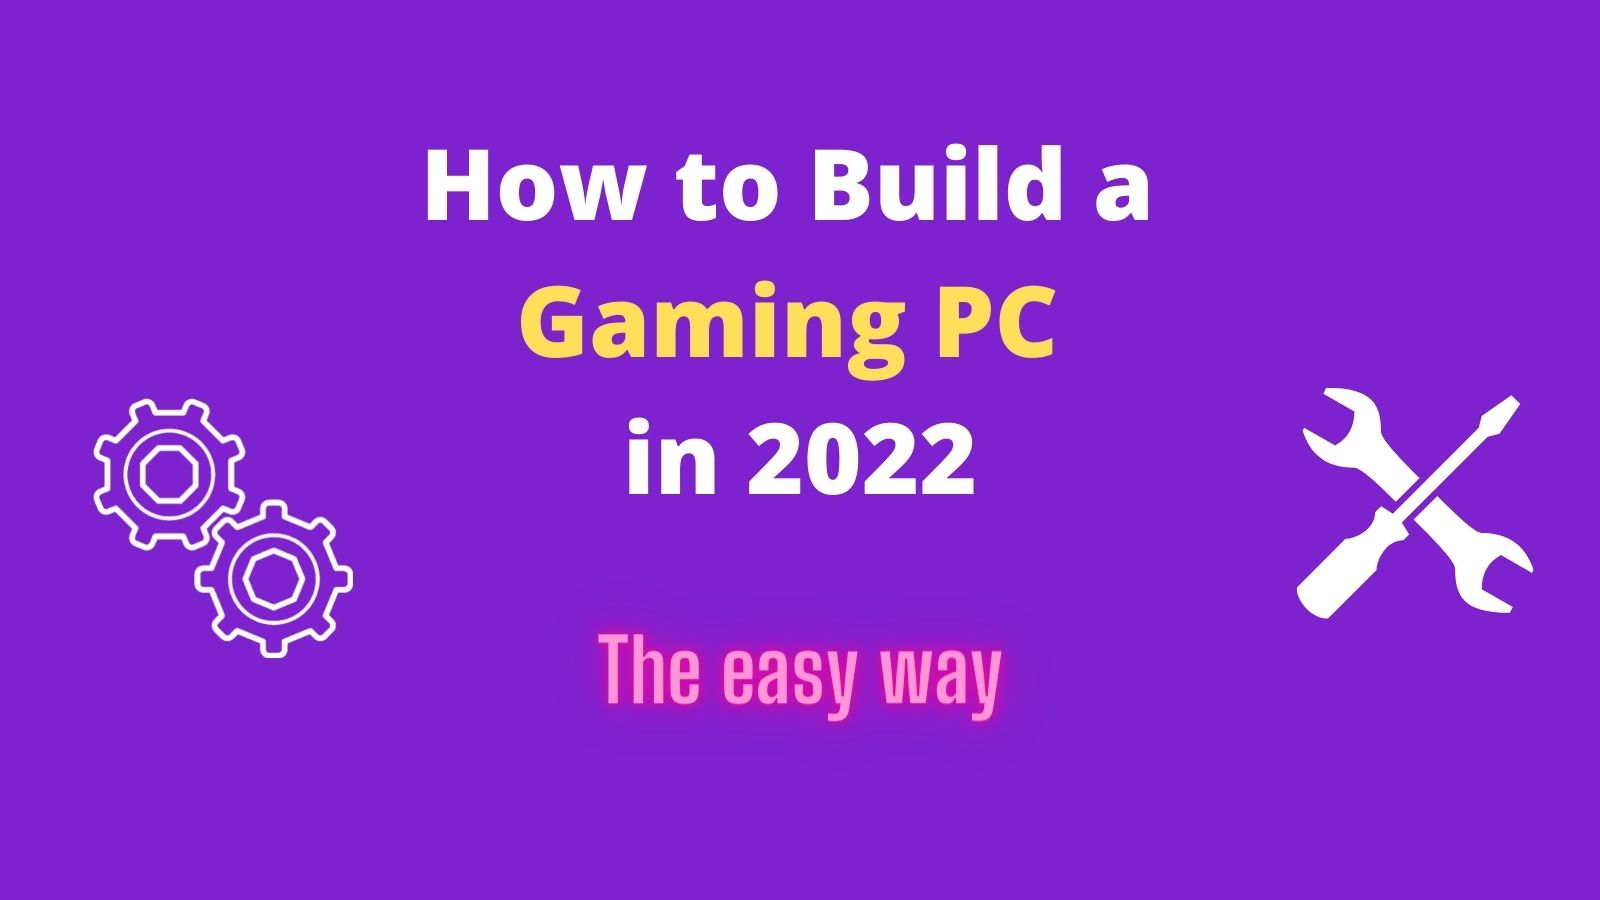 How to Build a Gaming PC in 2022